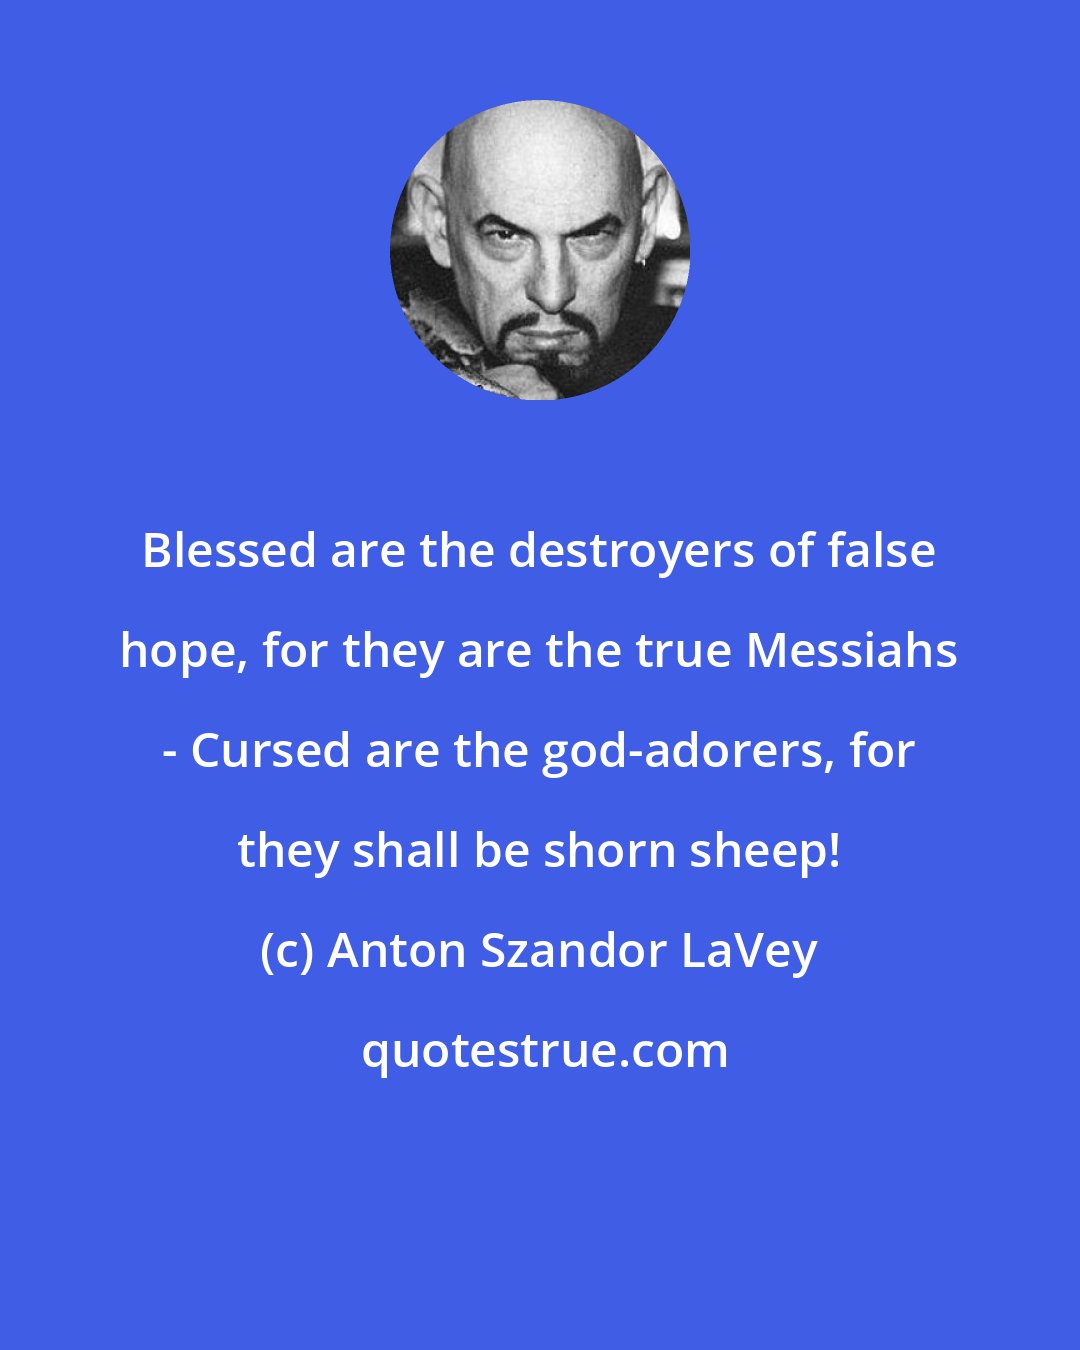 Anton Szandor LaVey: Blessed are the destroyers of false hope, for they are the true Messiahs - Cursed are the god-adorers, for they shall be shorn sheep!